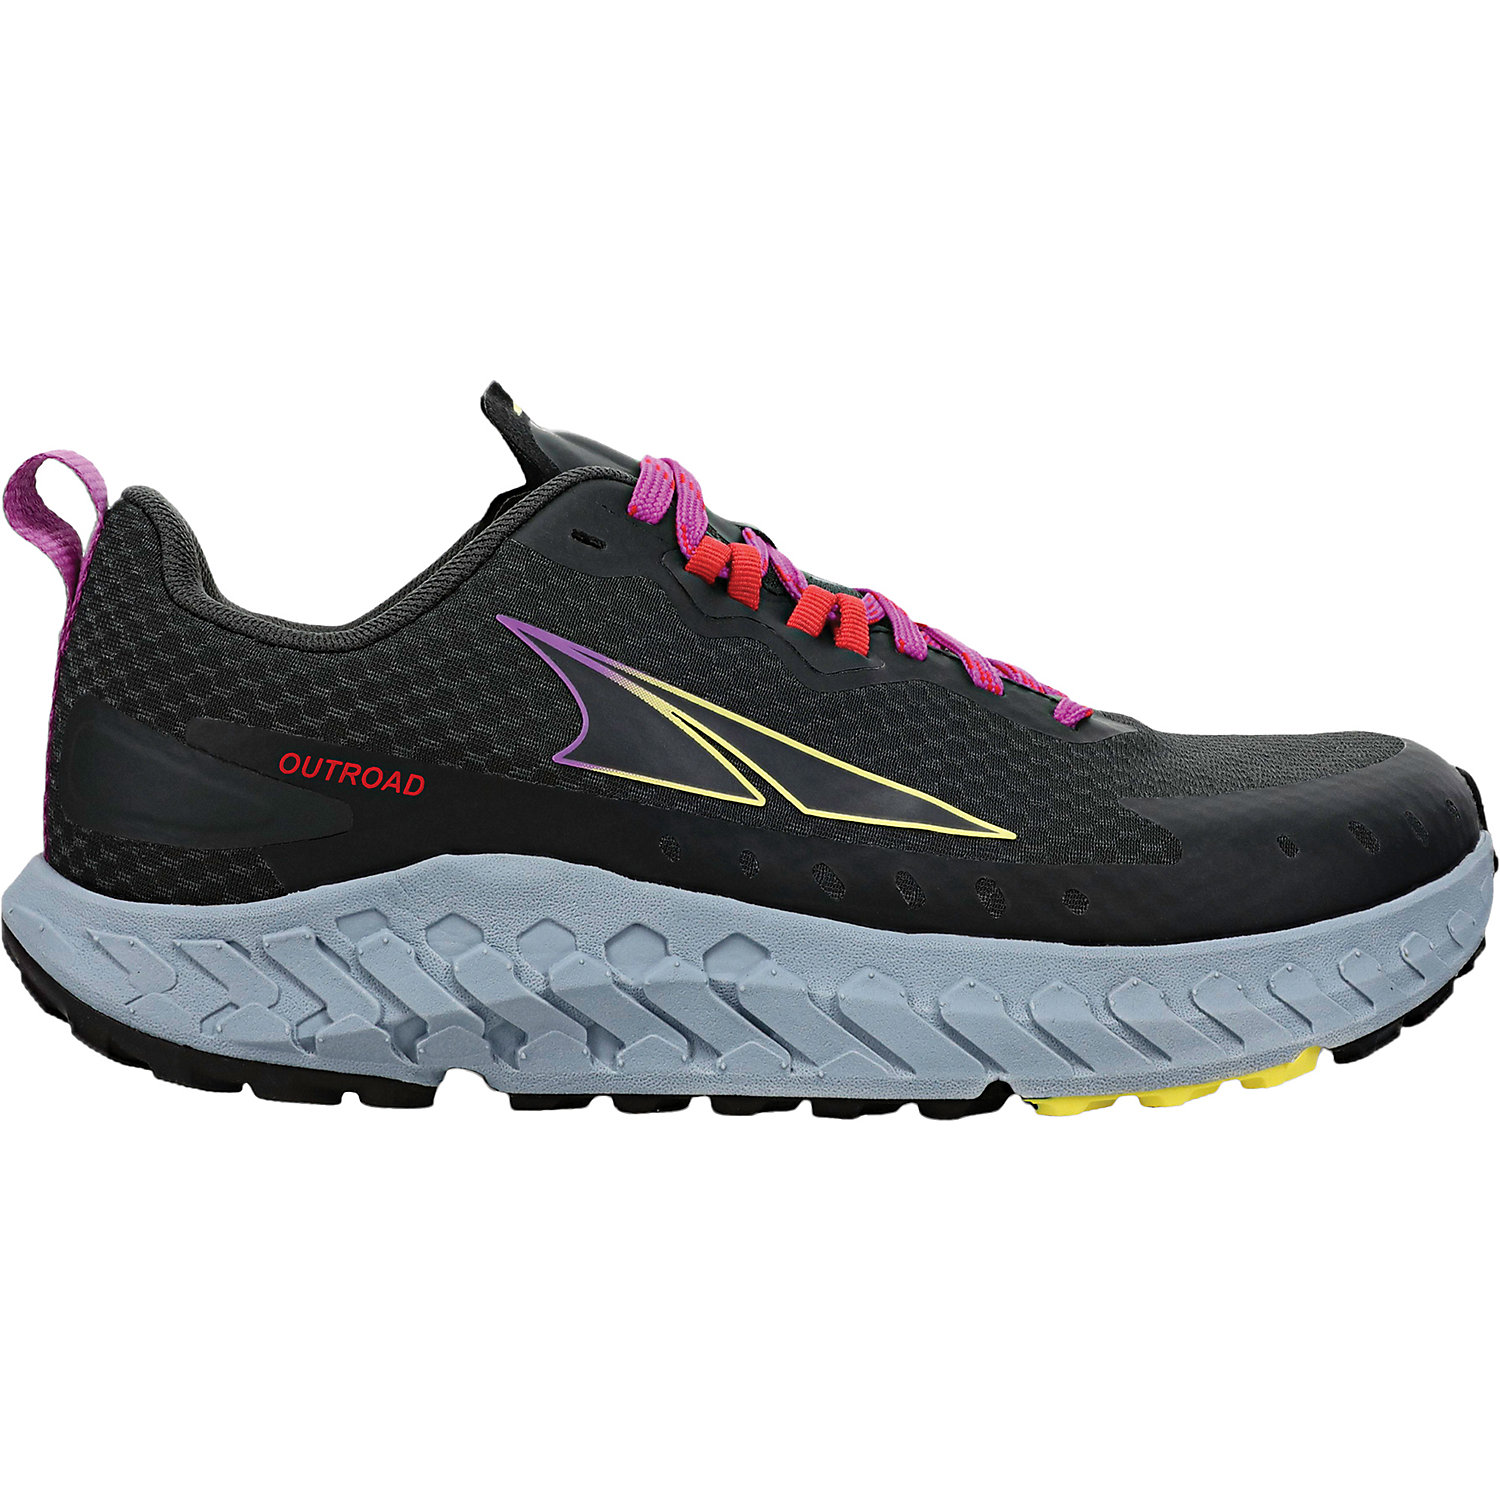 Altra Womens Outroad Shoe